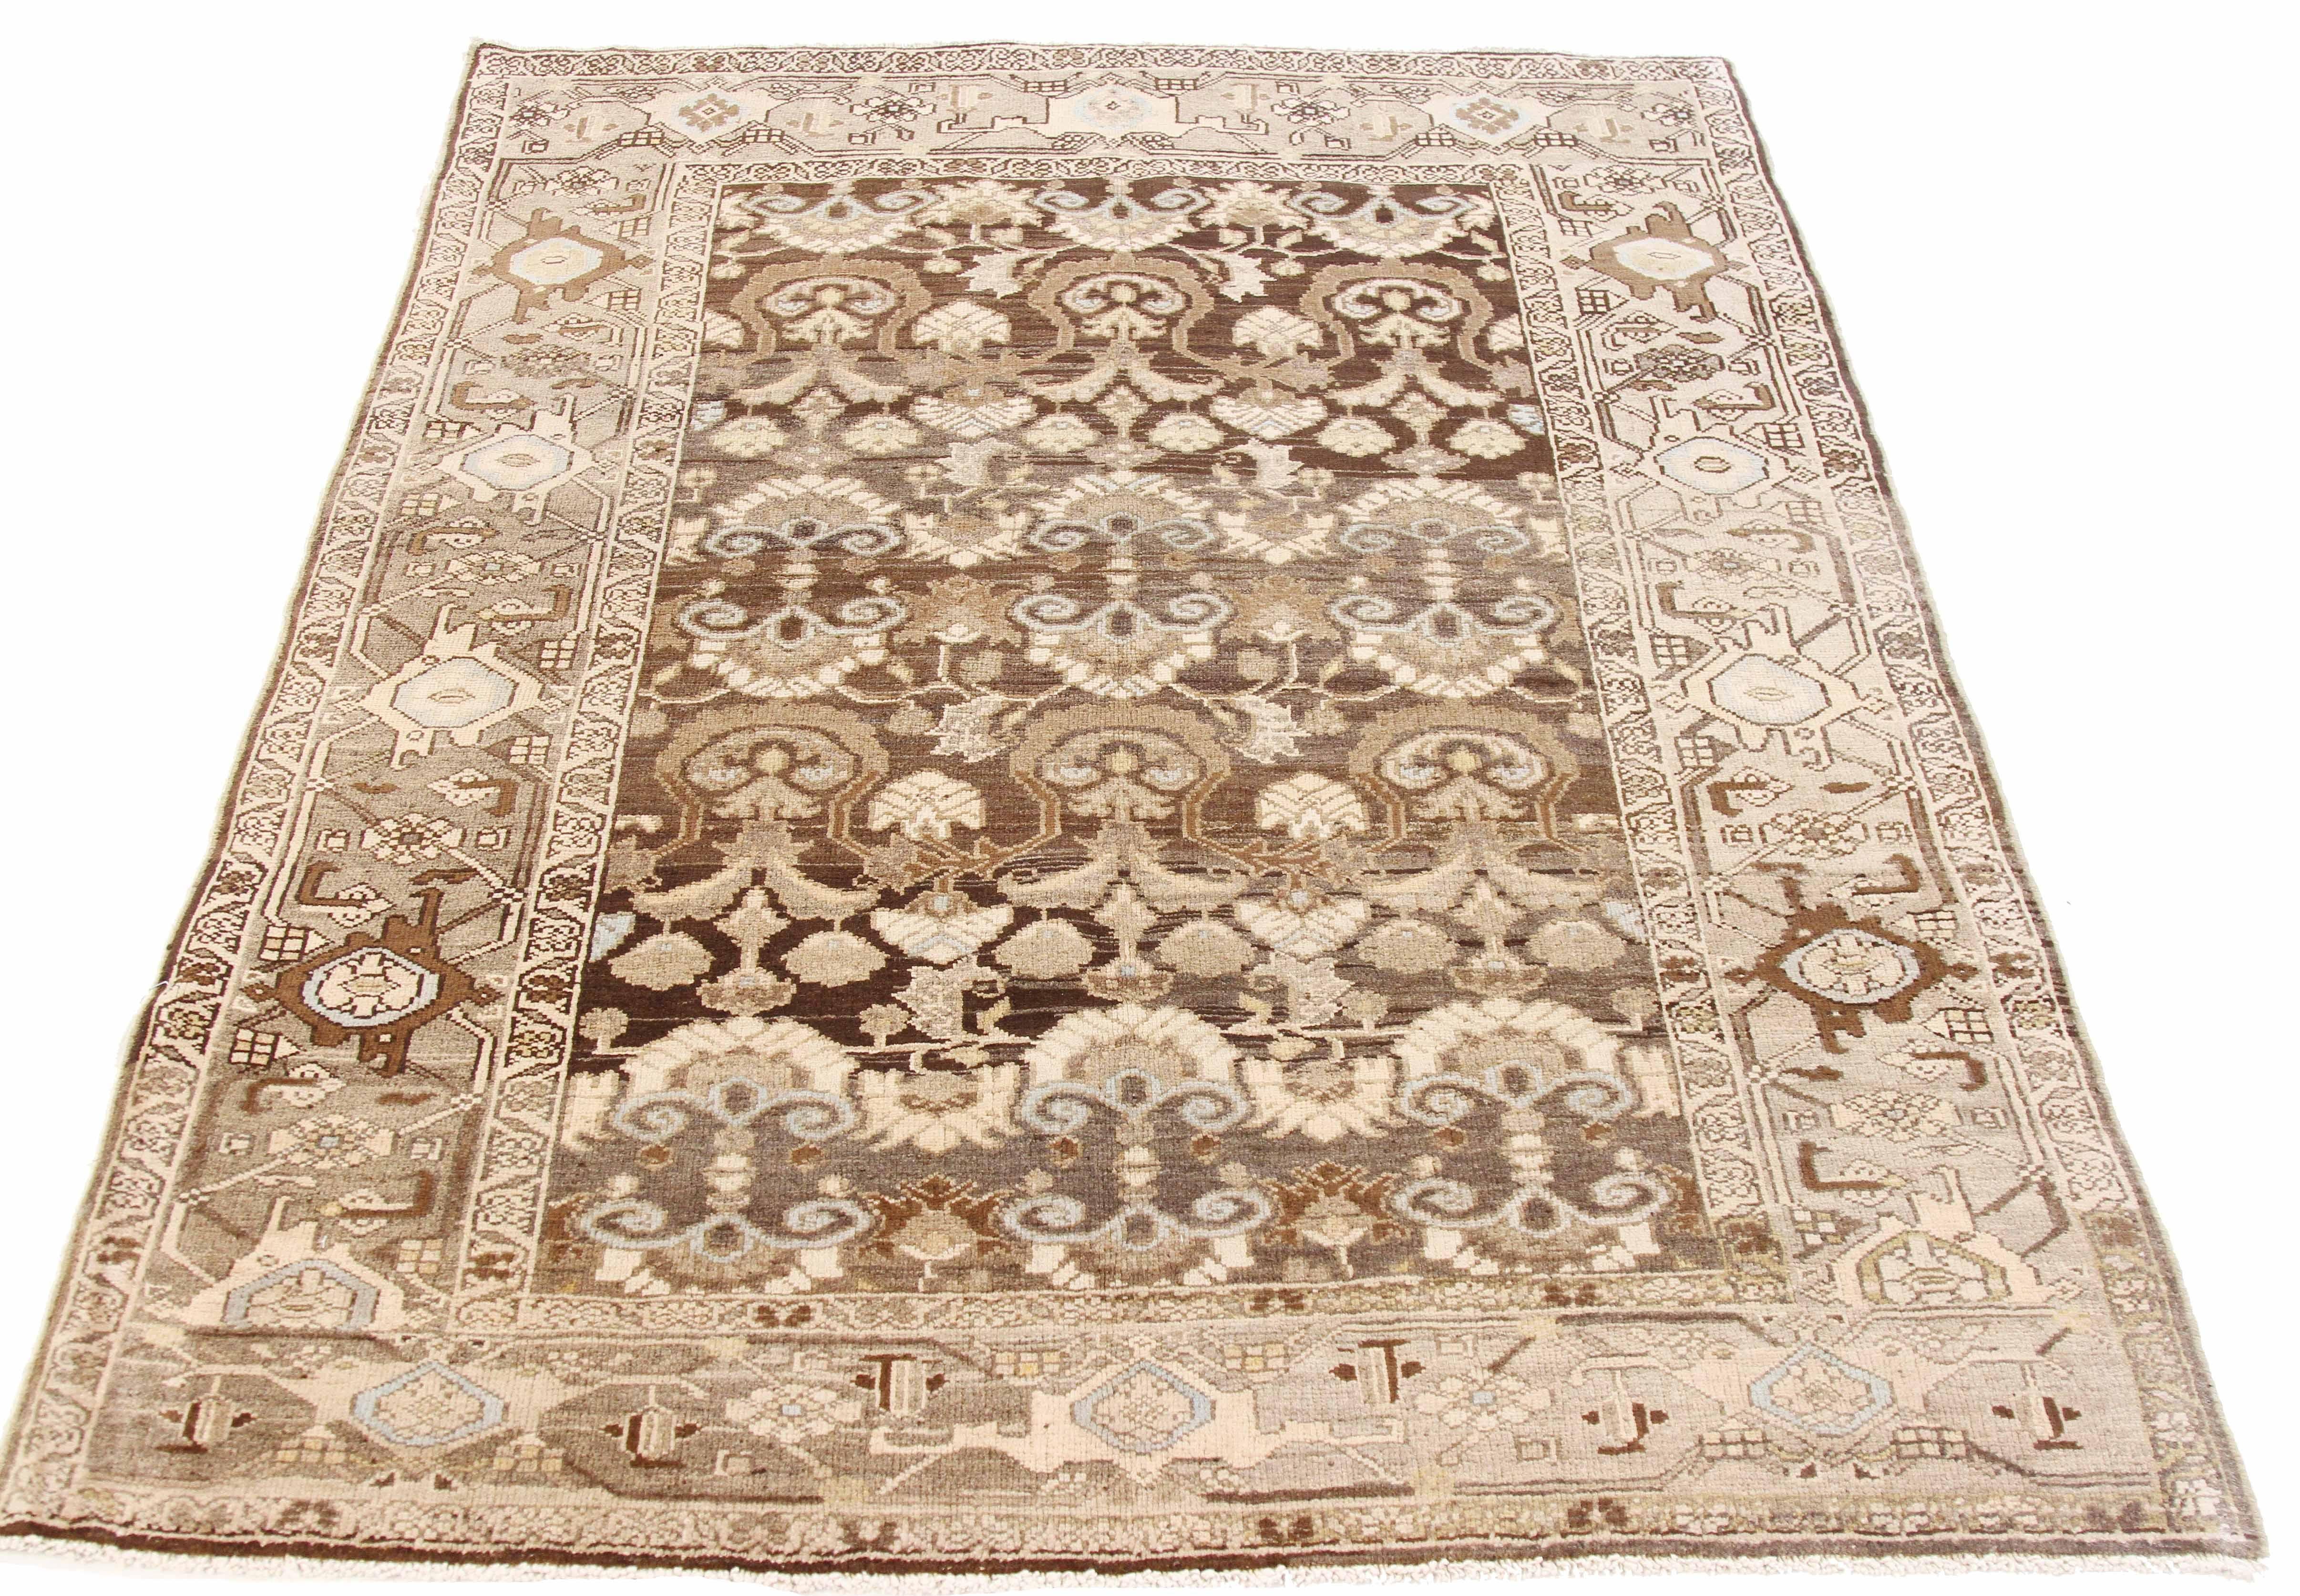 Antique Persian rug handwoven from the finest sheep’s wool and colored with all-natural vegetable dyes that are safe for humans and pets. It’s a traditional Gholtogh design featuring brown and beige botanical details on an ivory field. It’s a lovely